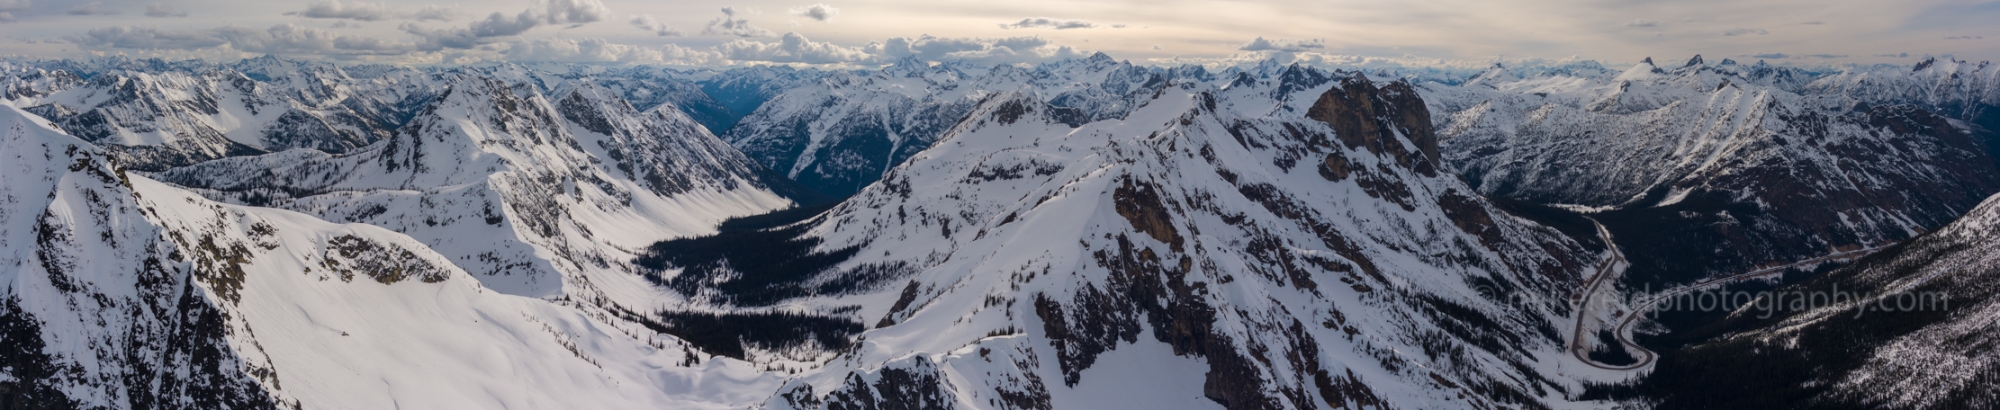 Over the North Cascades Silver Star and Kangaroo Peak to Liberty Bell Panorama Aerial Photography.jpg